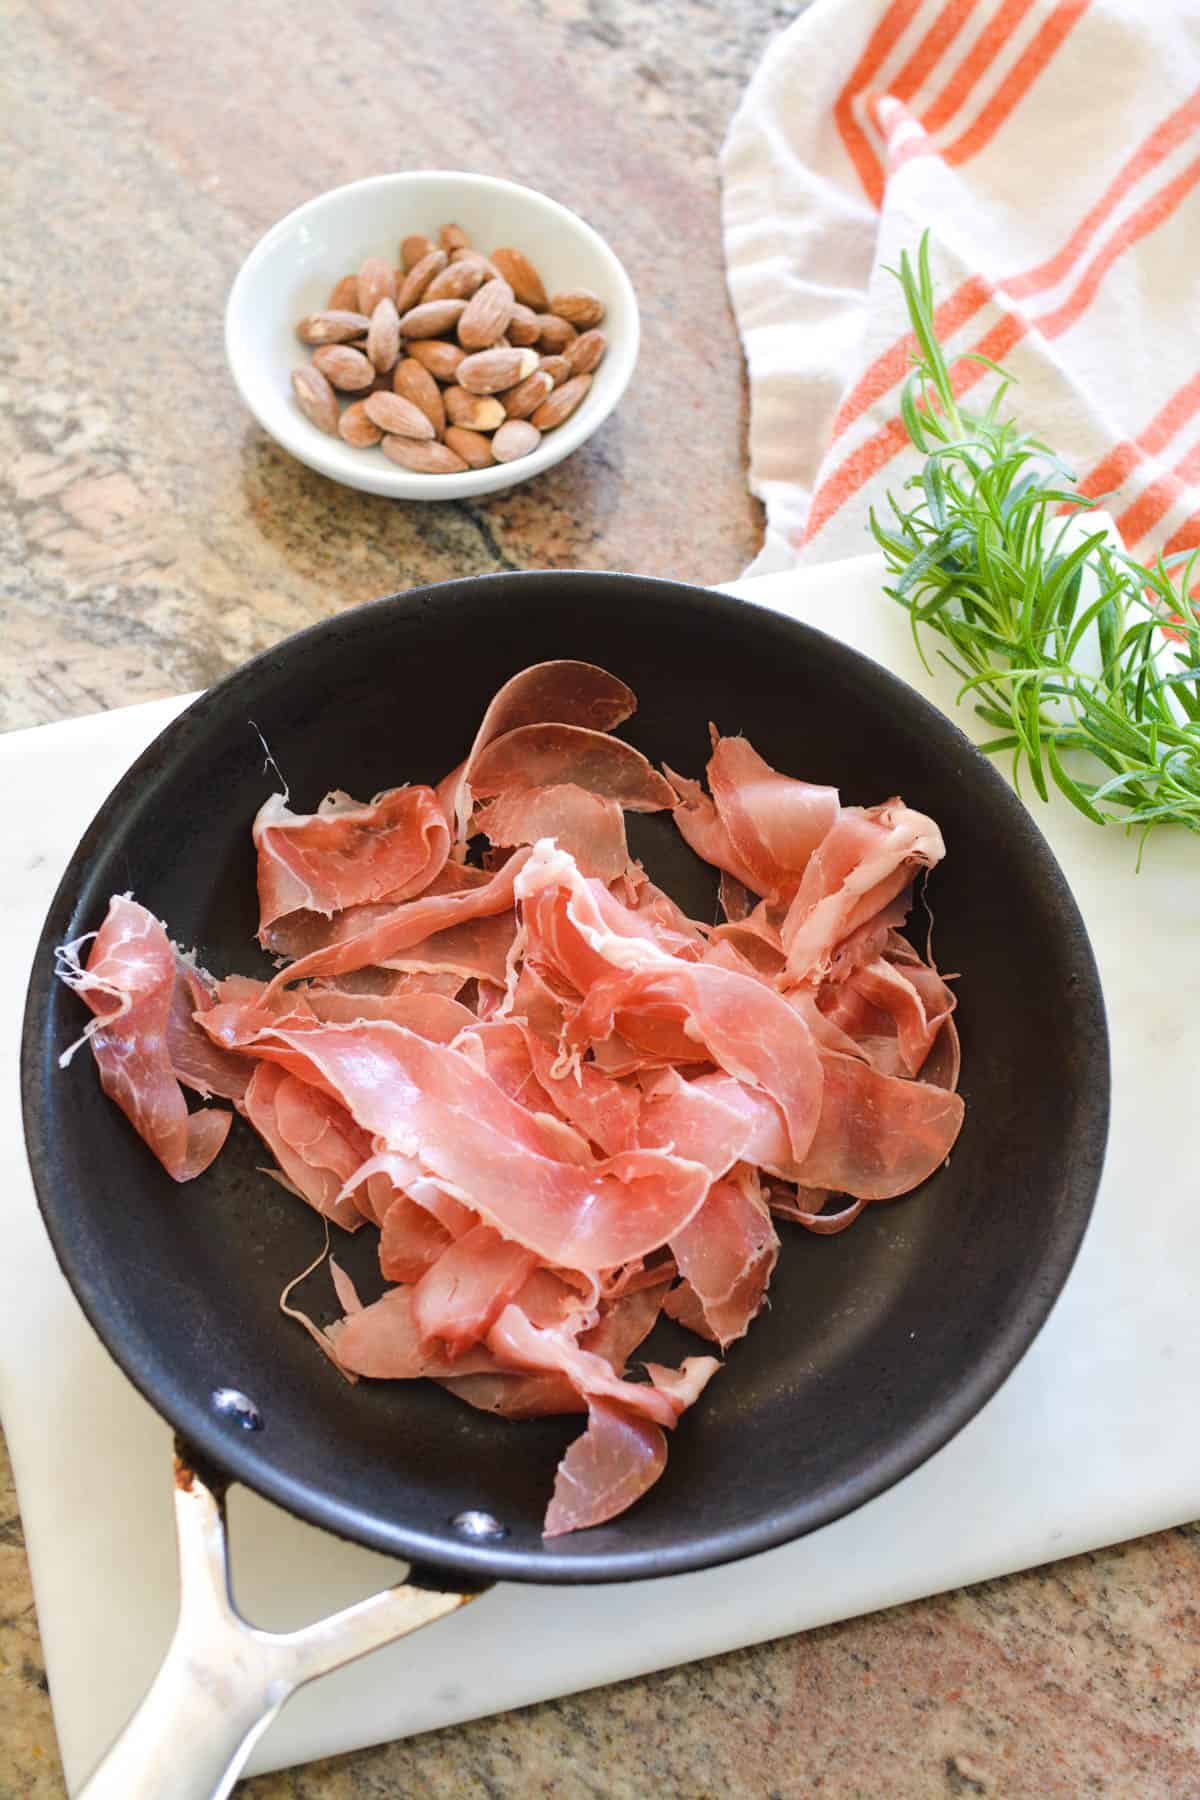 Prosciutto in a saute pan on the counter next to a bowl of almonds and fresh rosemary.